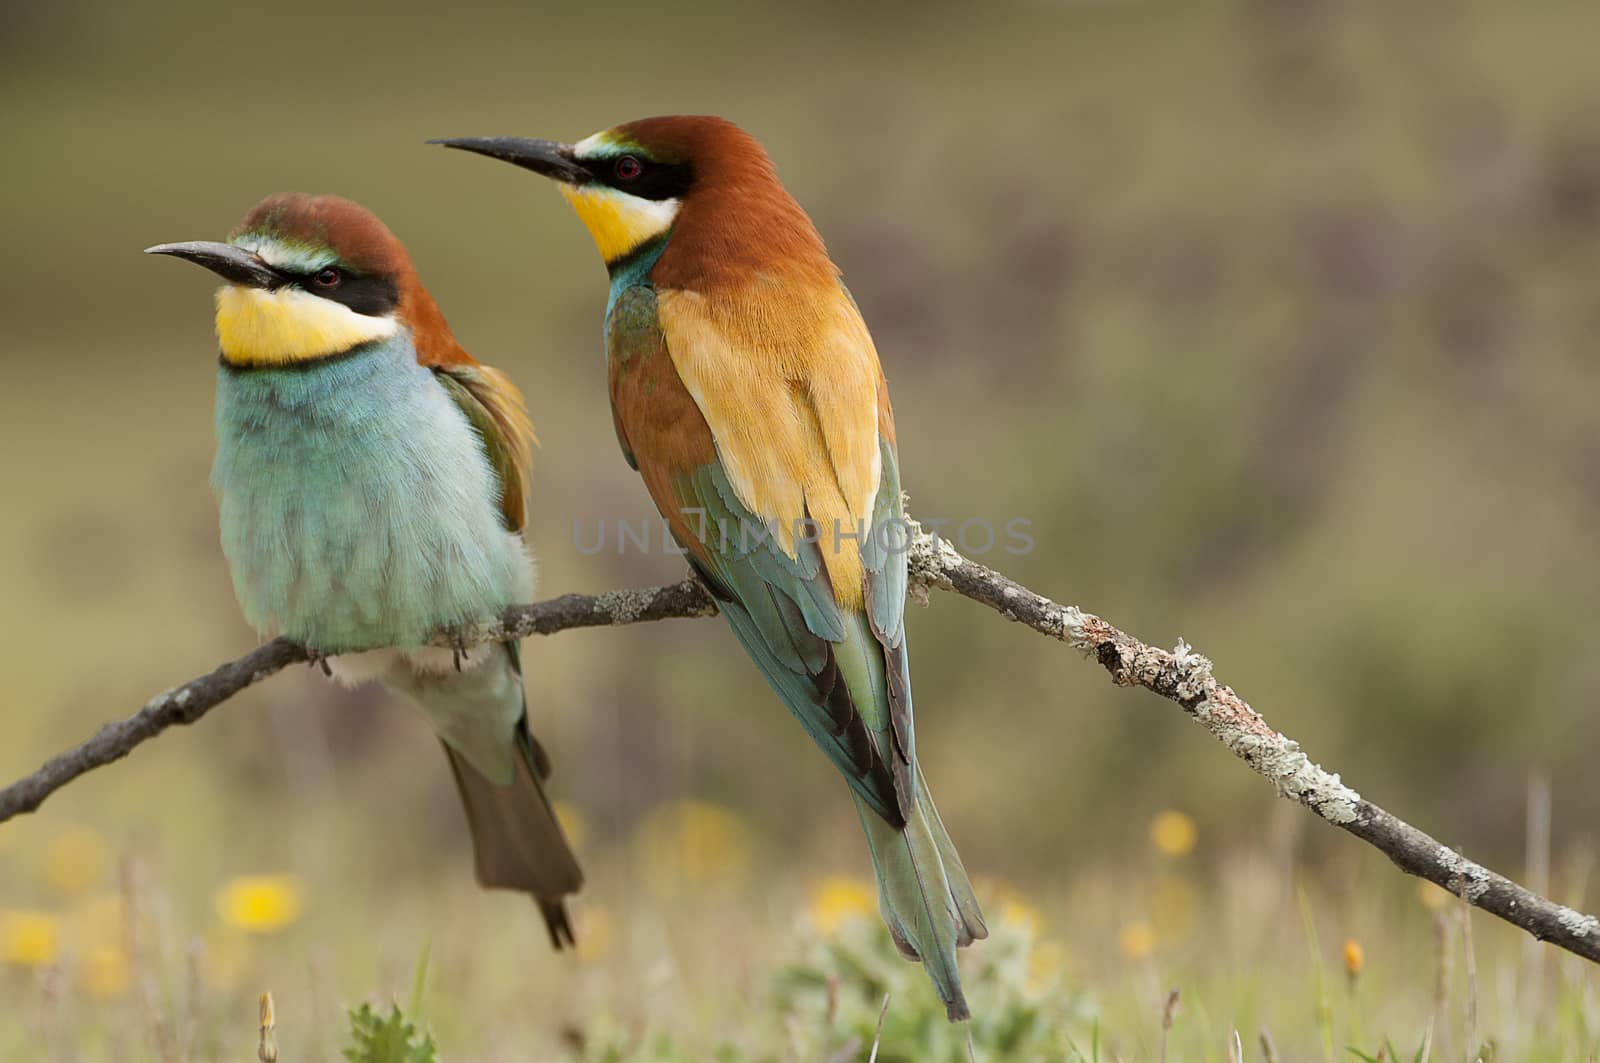 European bee-eater (Merops apiaster), couple perched on a branch